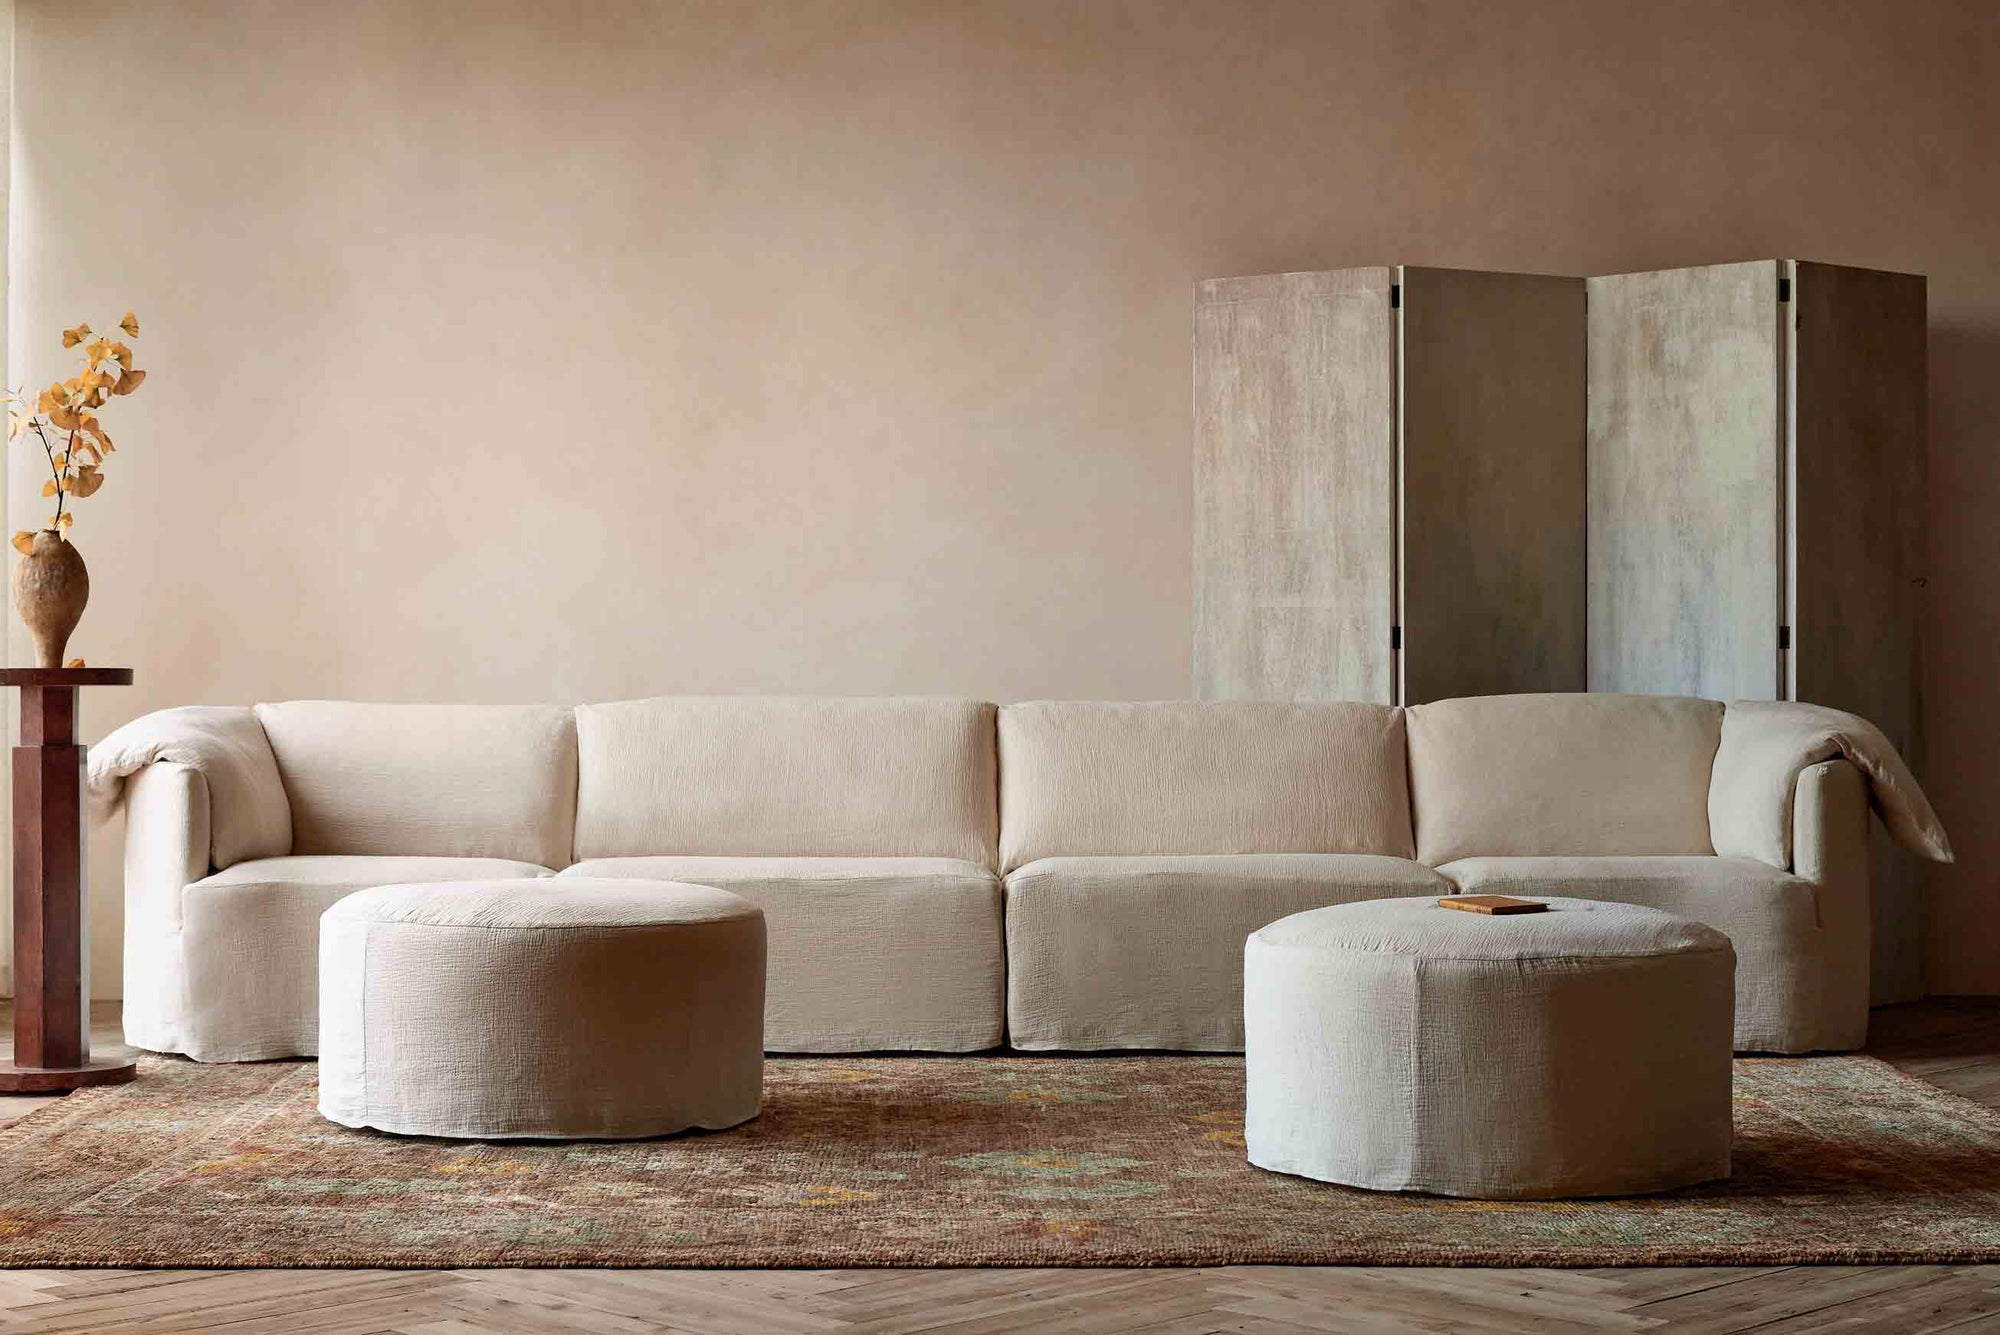 Loula U-Shape Sectional in Corn Silk, a light beige Washed Cotton Linen, placed in a room on top of a patterned rug